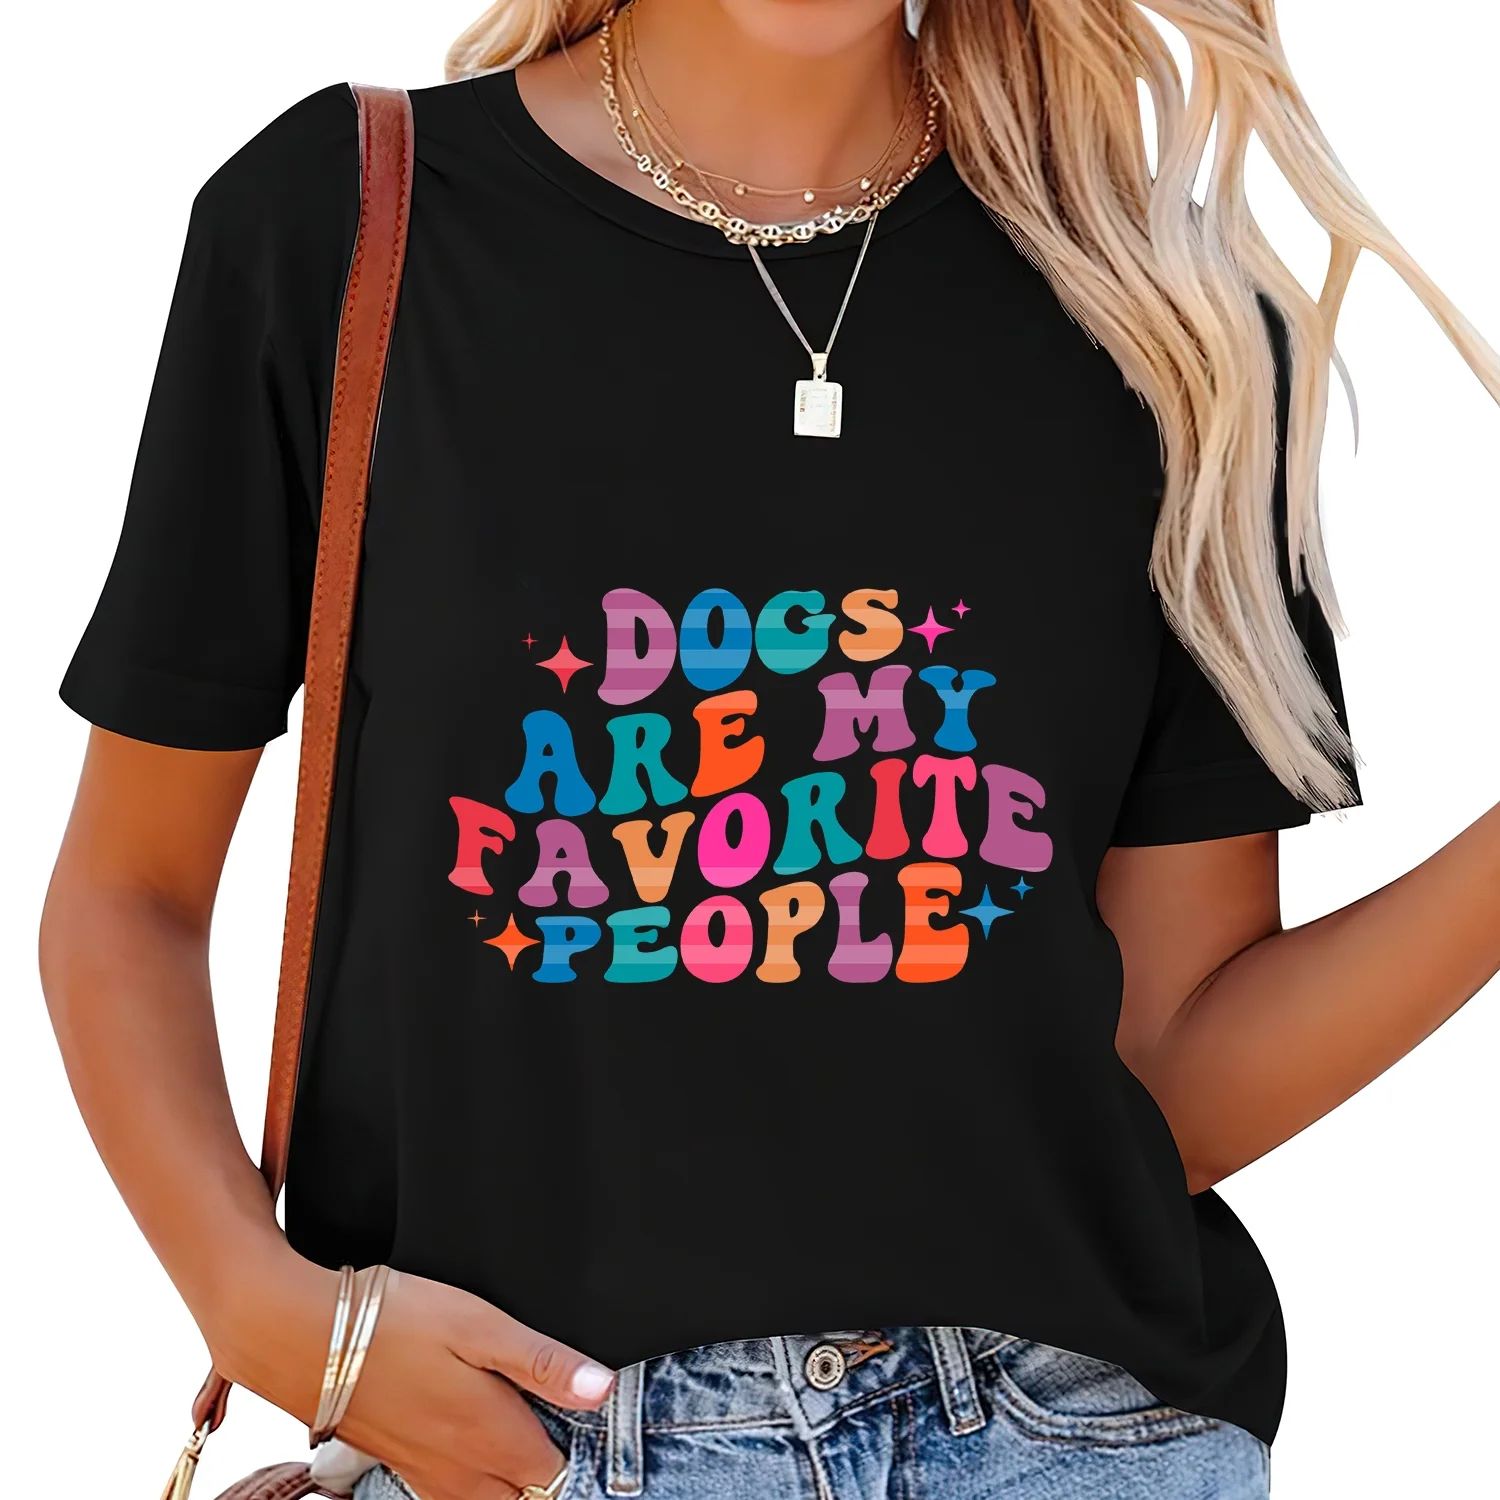 Dogs Are My Favorite People Women's Graphic Tee, Short Sleeve Shirt with Fashion Print - Comforta... | Walmart (US)